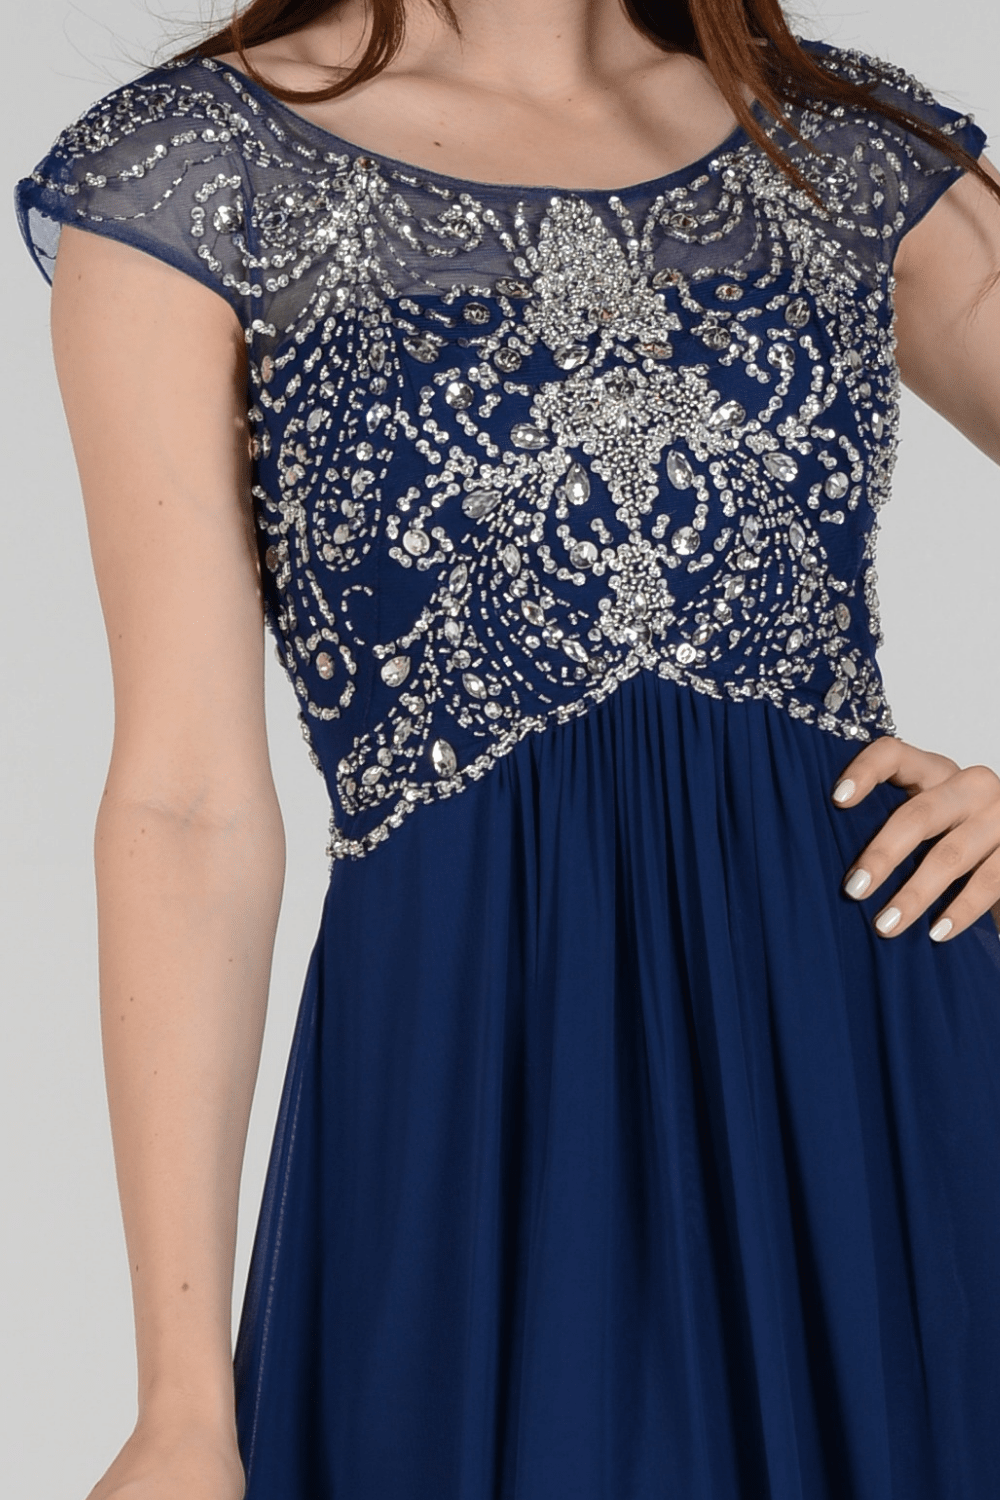 Long Cap Sleeve Dress with Jeweled Bodice by Poly USA 7122